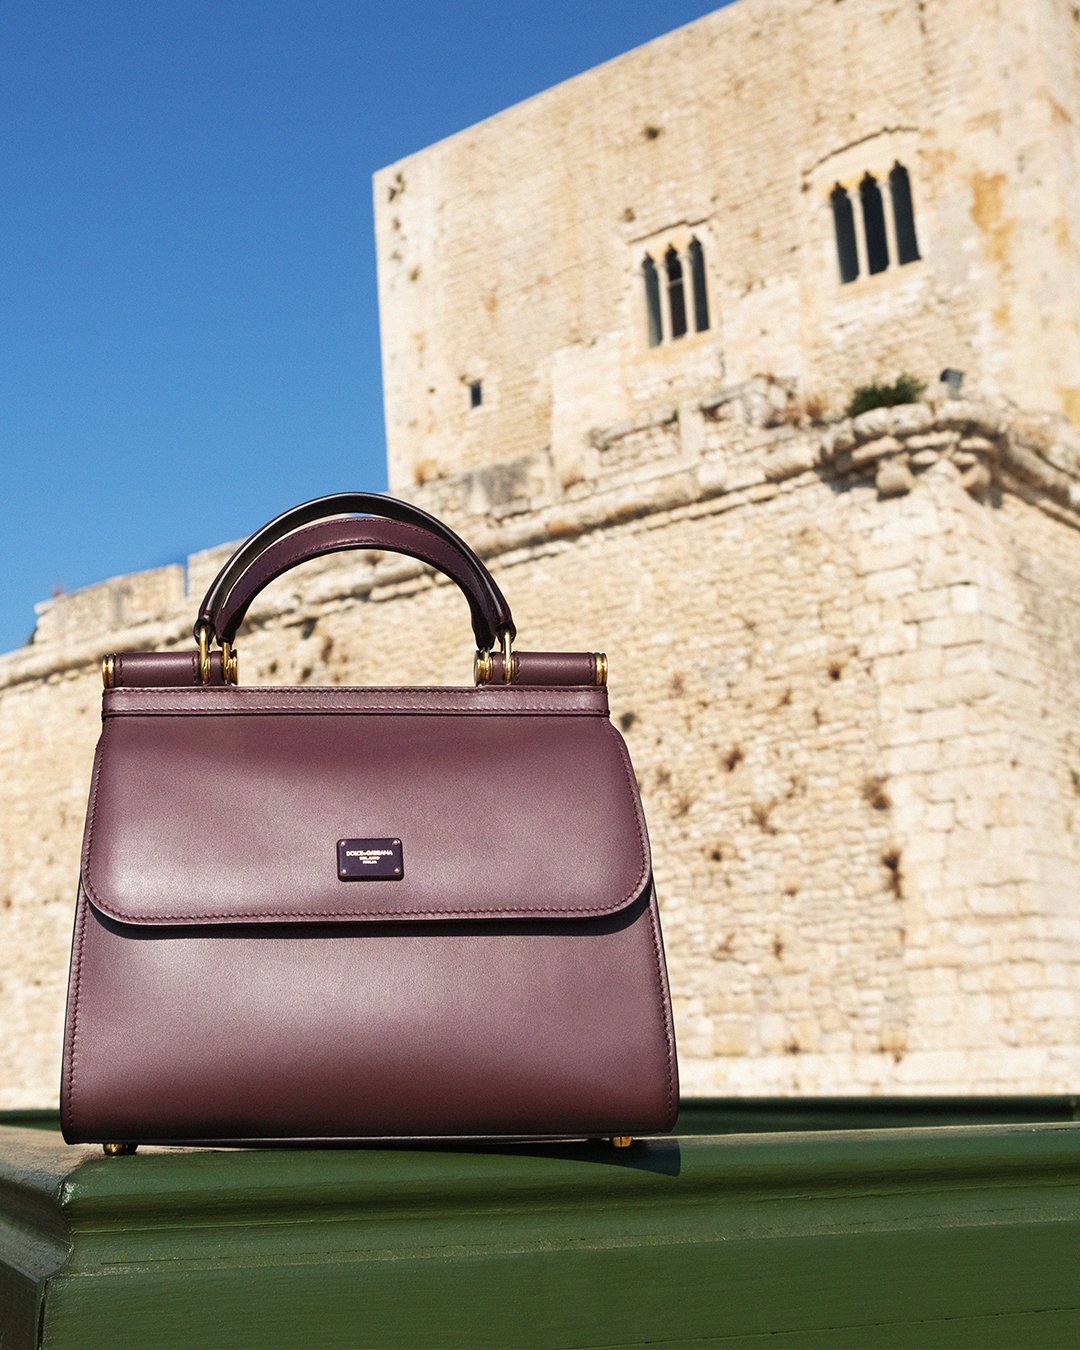 Dolce & Gabbana on X: The medium-sized burgundy #DGSicily58 Bag is  presented in front of the Torre Cabrera, a 15th century watchtower in  Pozzallo, Sicily. Discover more variations of the iconic #DGSicilyBag